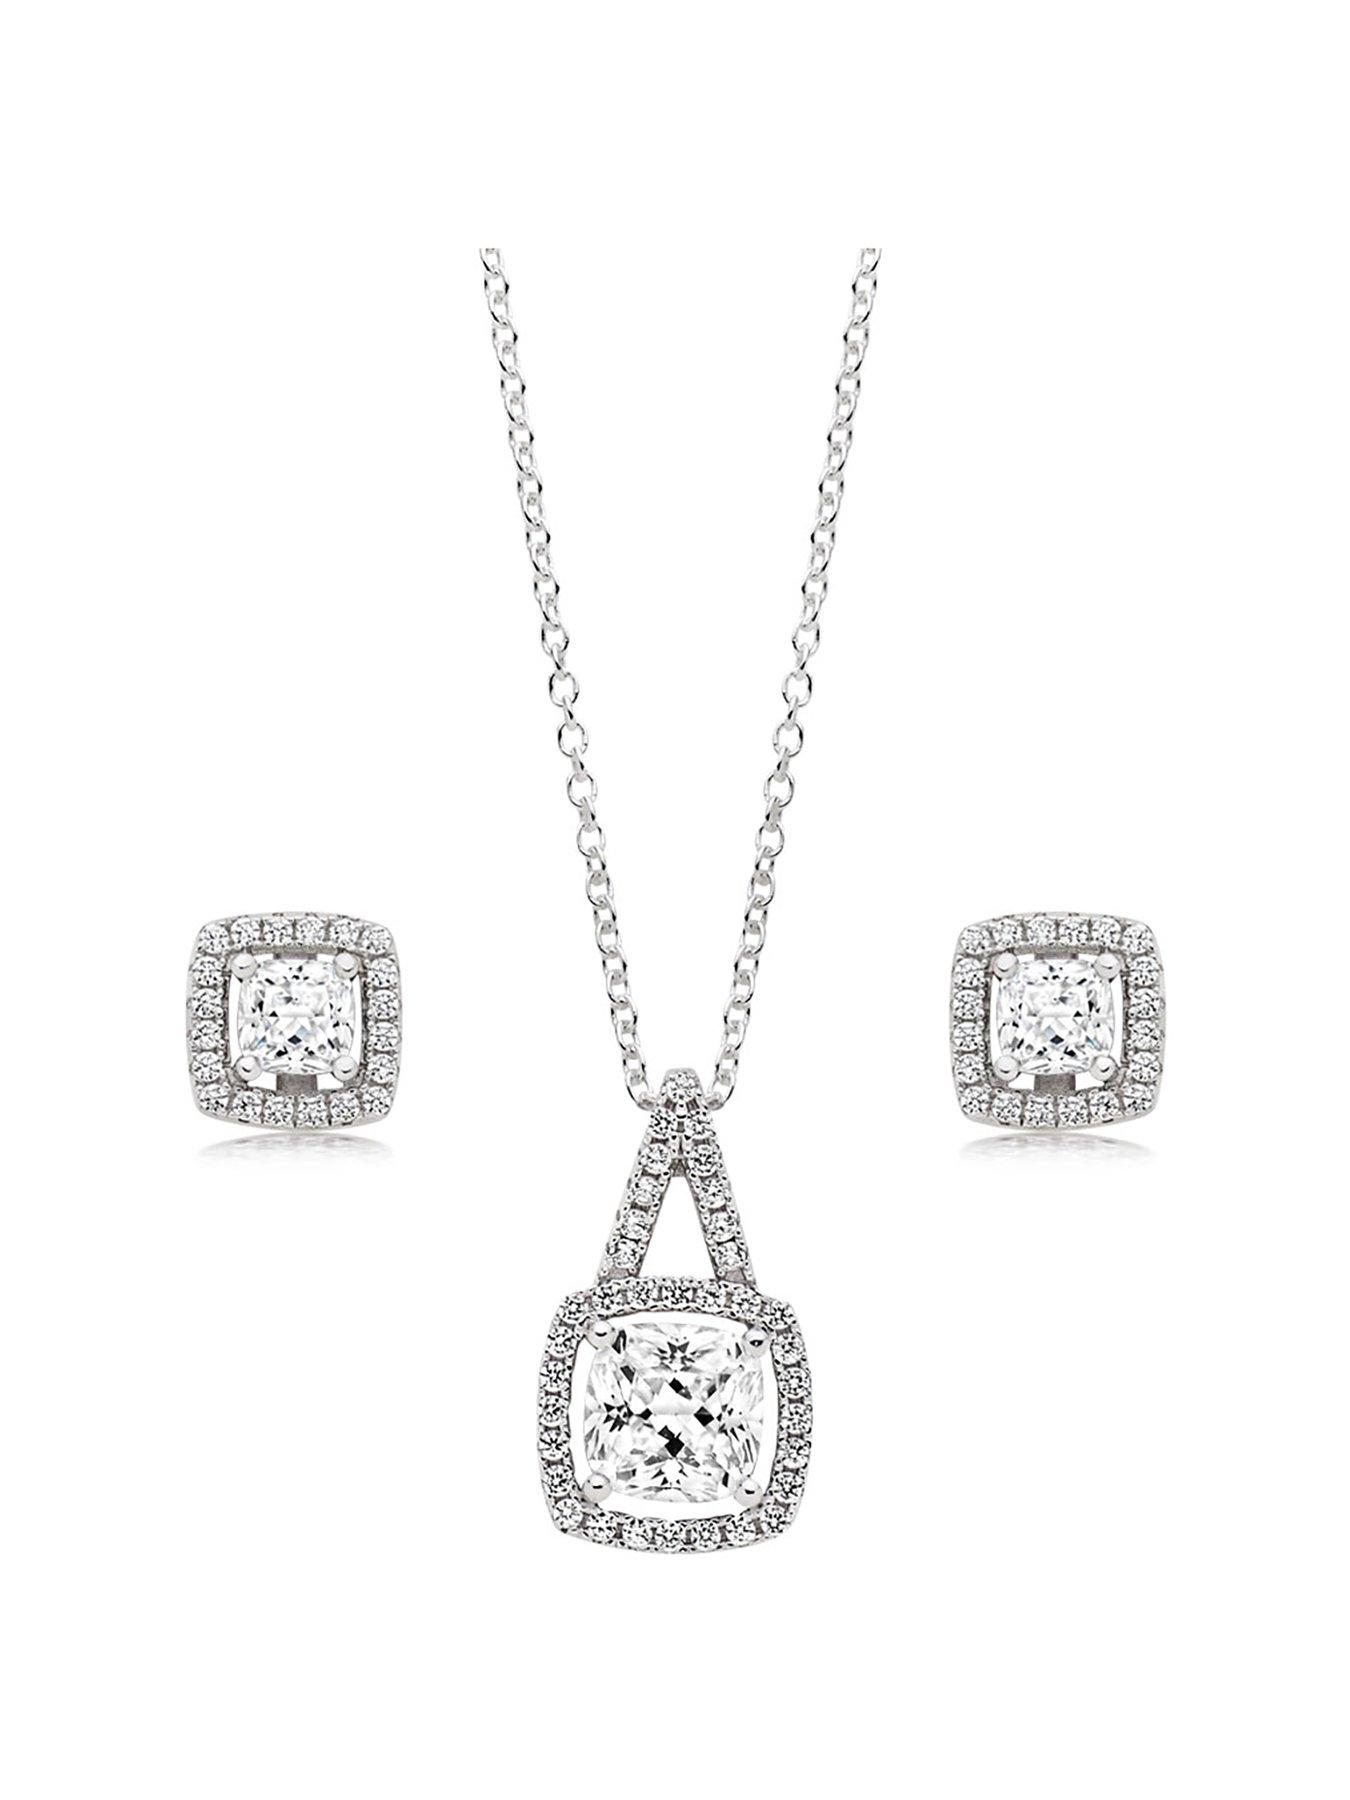 Women Silver Cubic Zirconia Square Halo Pendant and Earrings Set